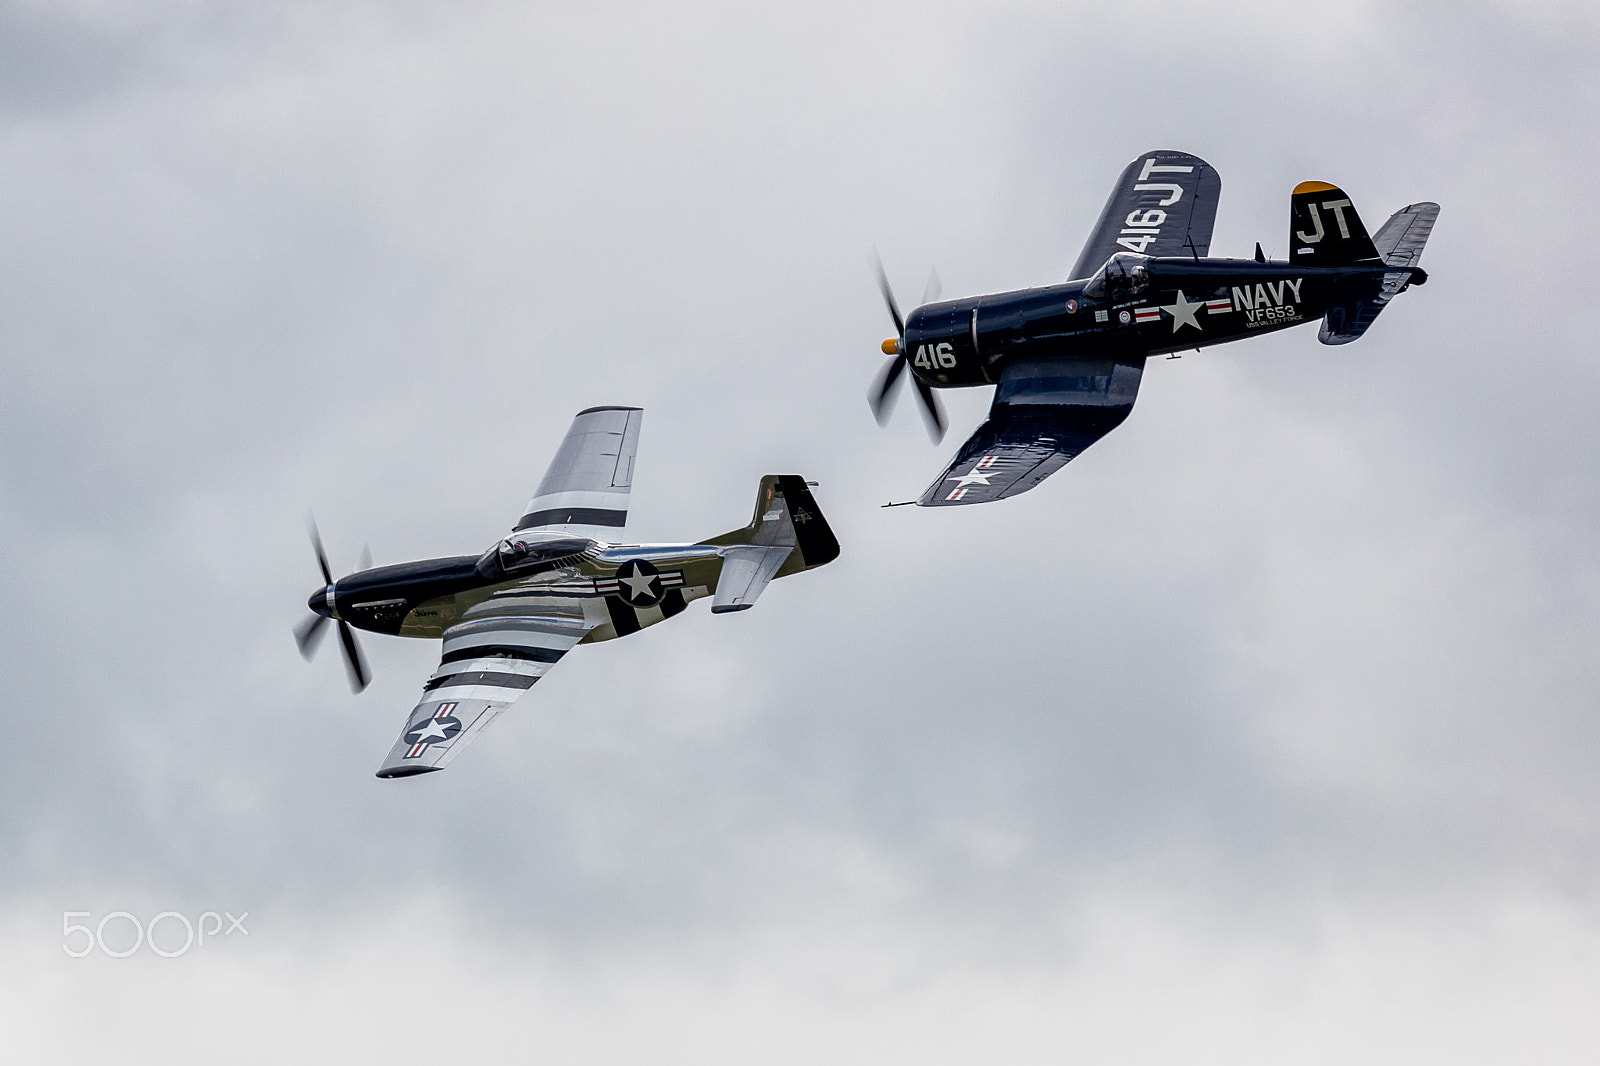 Canon EOS 5DS + 150-600mm F5-6.3 DG OS HSM | Sports 014 sample photo. F-4u corsair and p-51 mustang in flight 5 photography